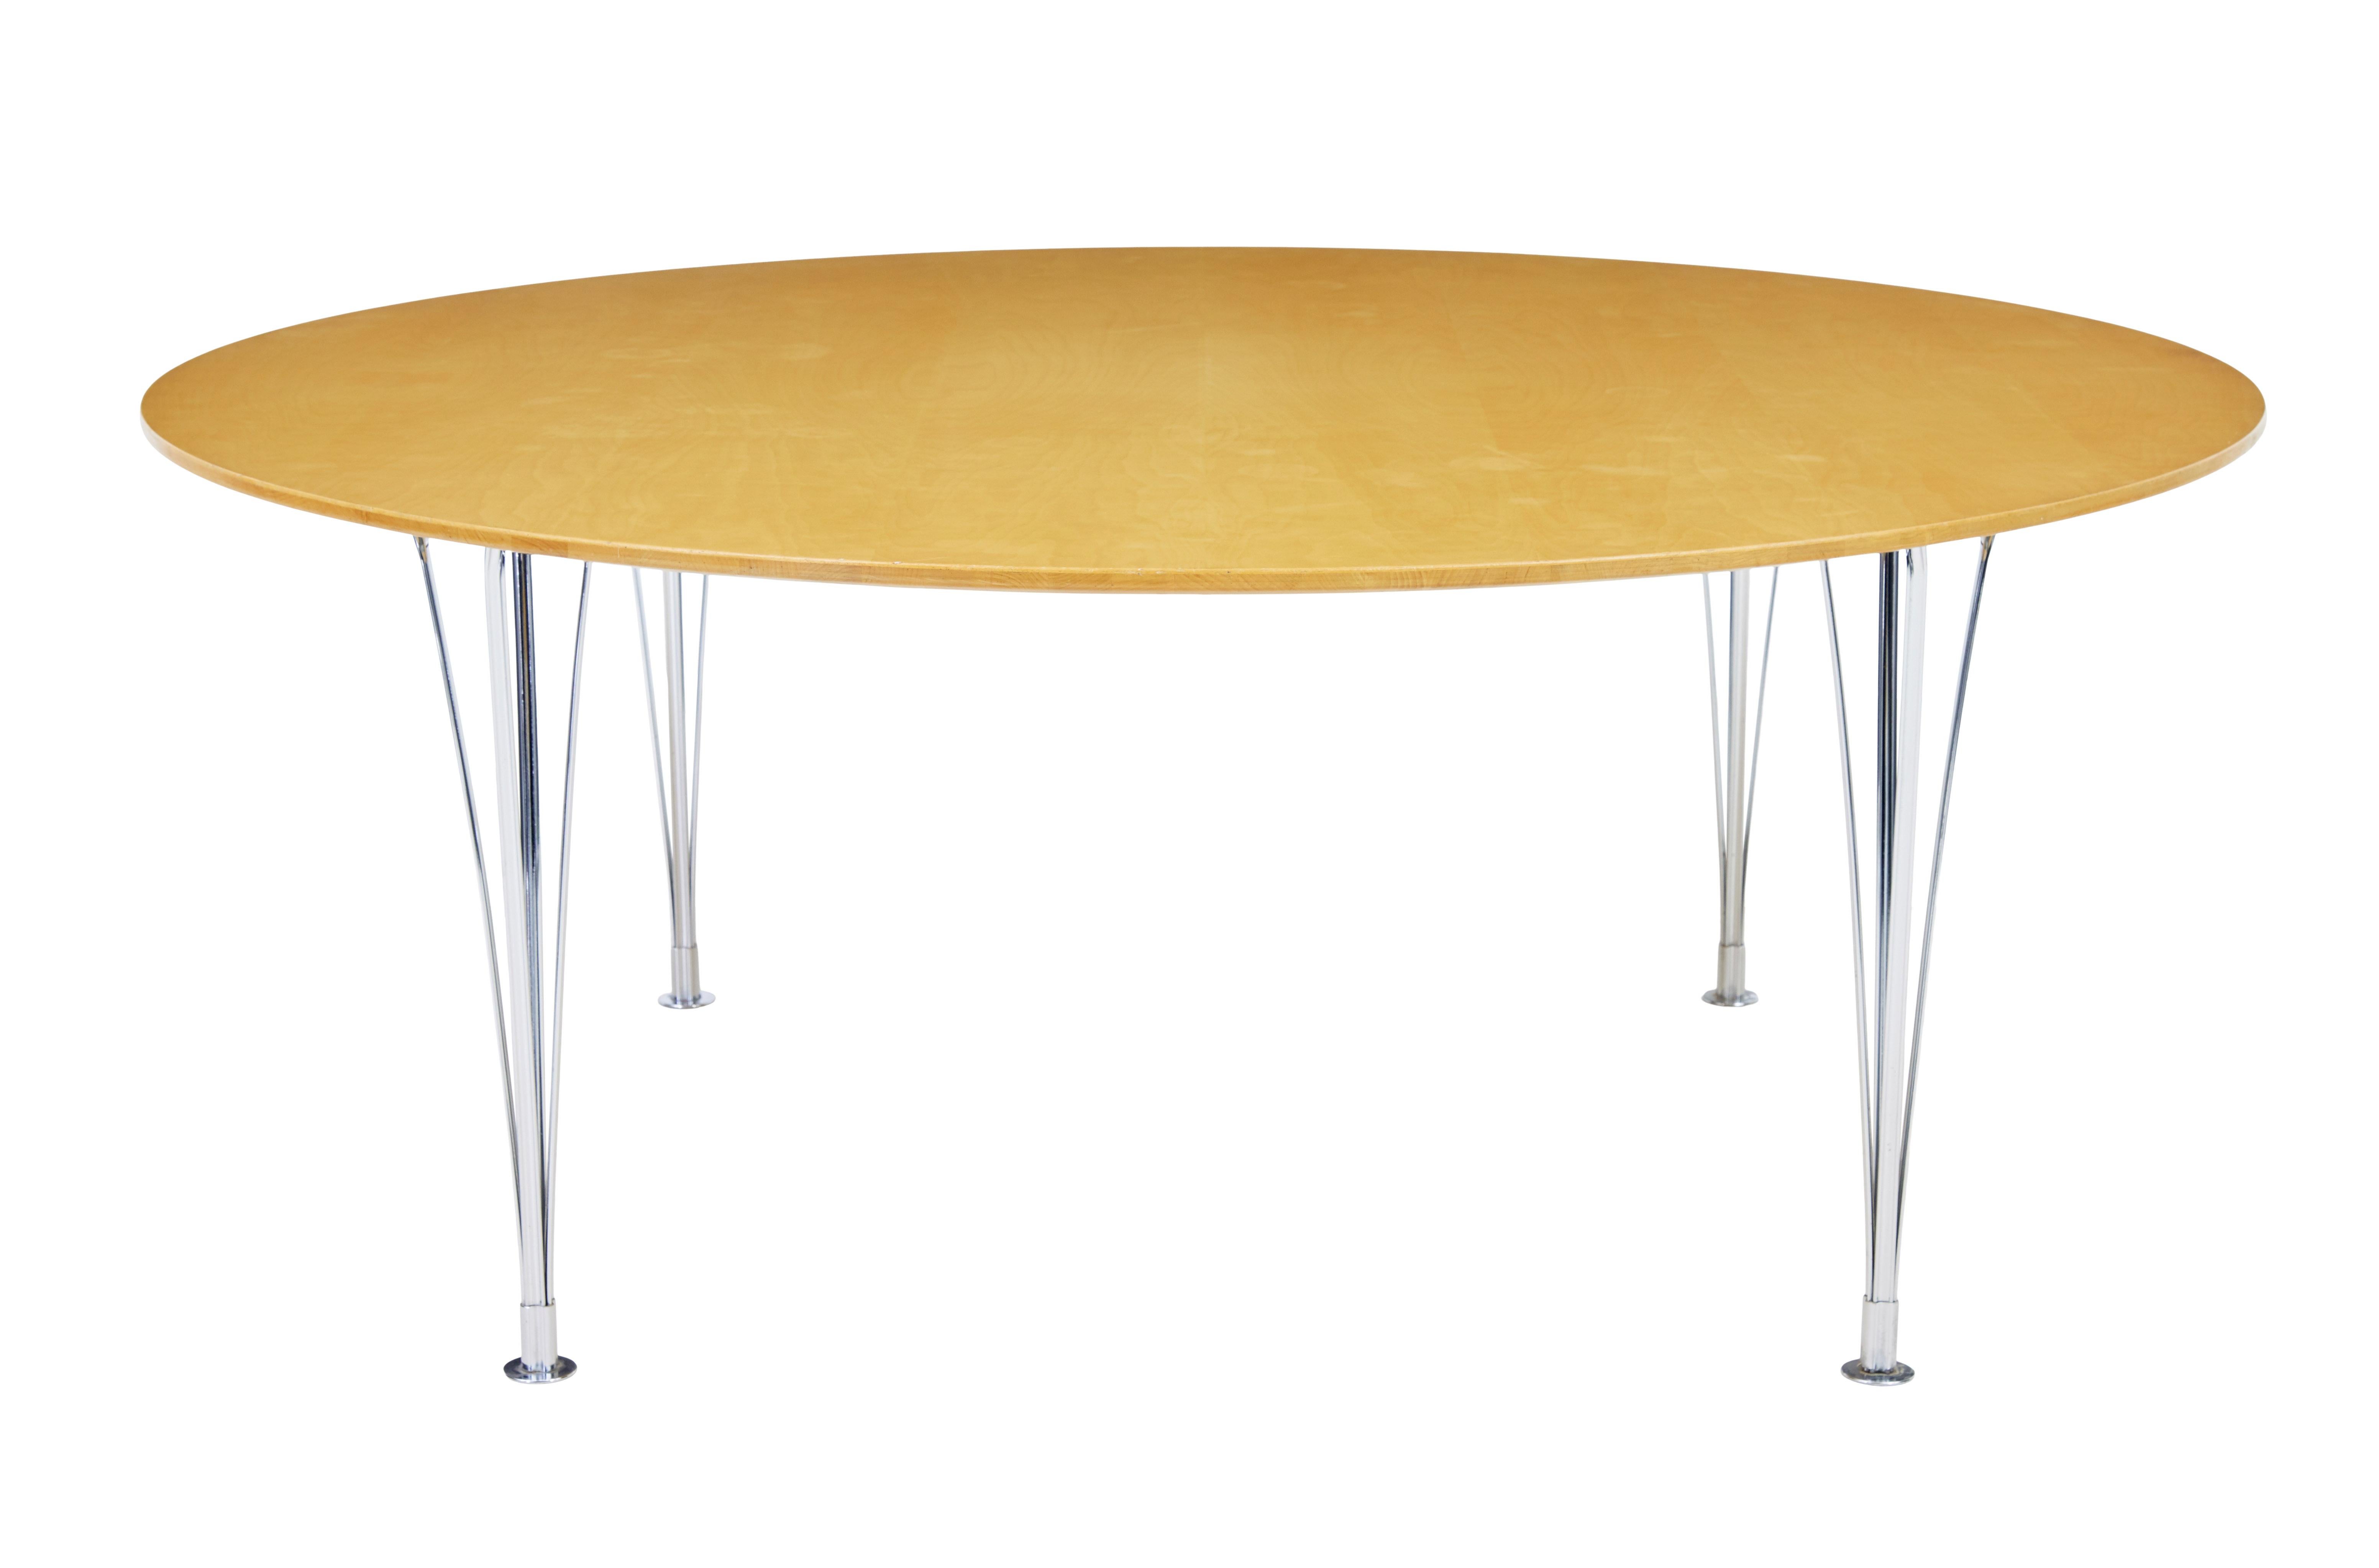 Large round Scandinavian Bruno Mathsson birch dining table circa 1980.

Fine piece of known Scandinavian furniture designer Bruno Mathsson. Seats 10. Detachable chromed legs allowing for cheaper transport.

Due to the nature of it's construction it